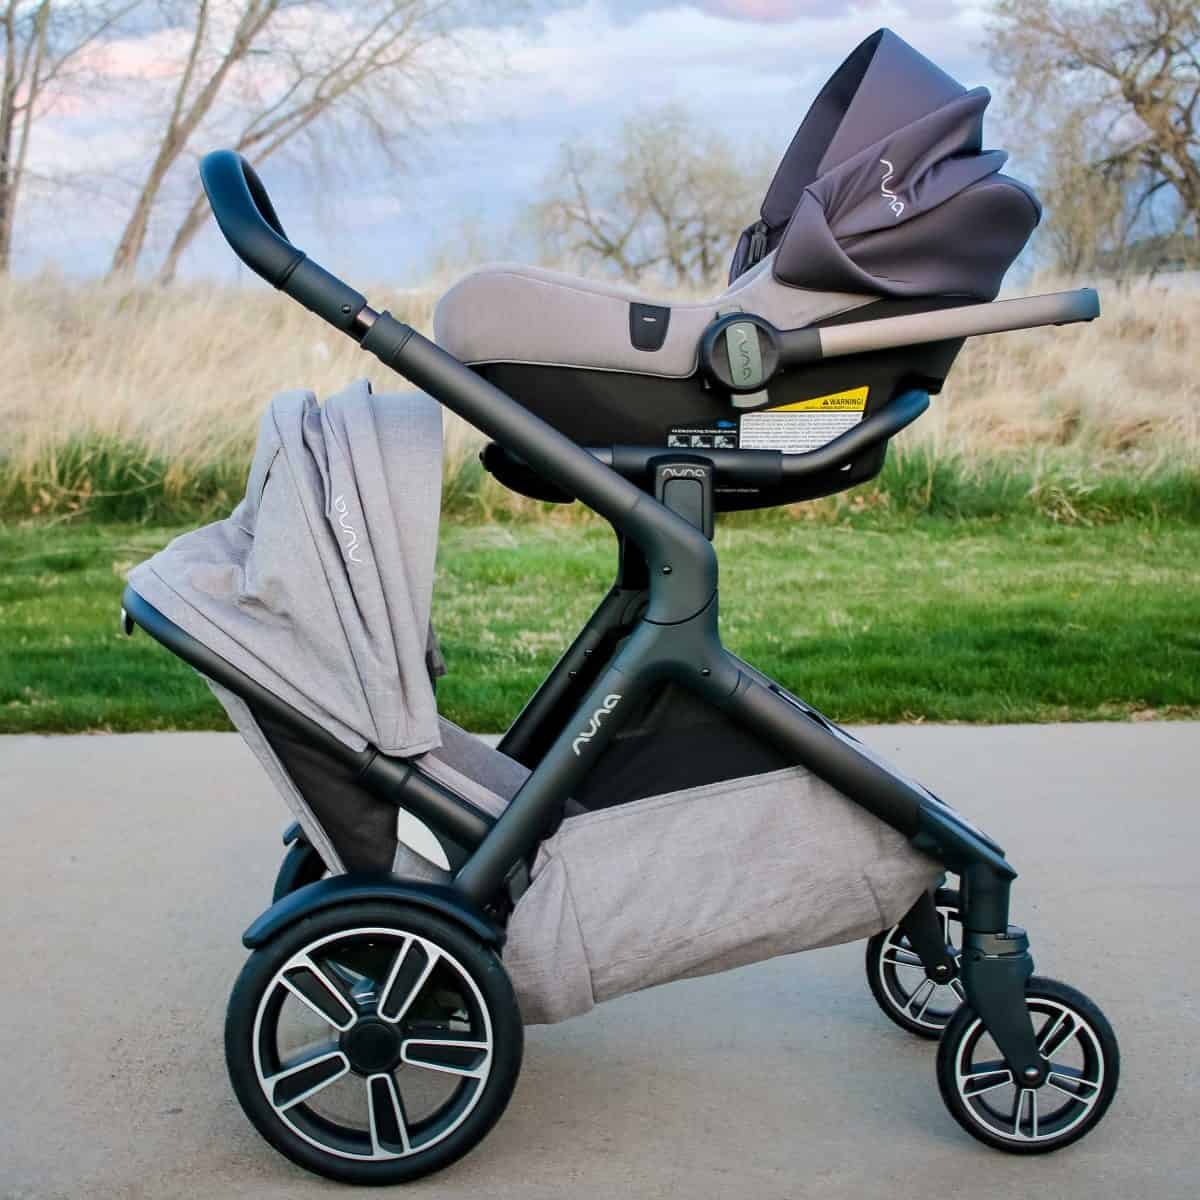 The Best Travel Set For A Growing Family: Nuna Pipa Lite And Demi Grow Stroller